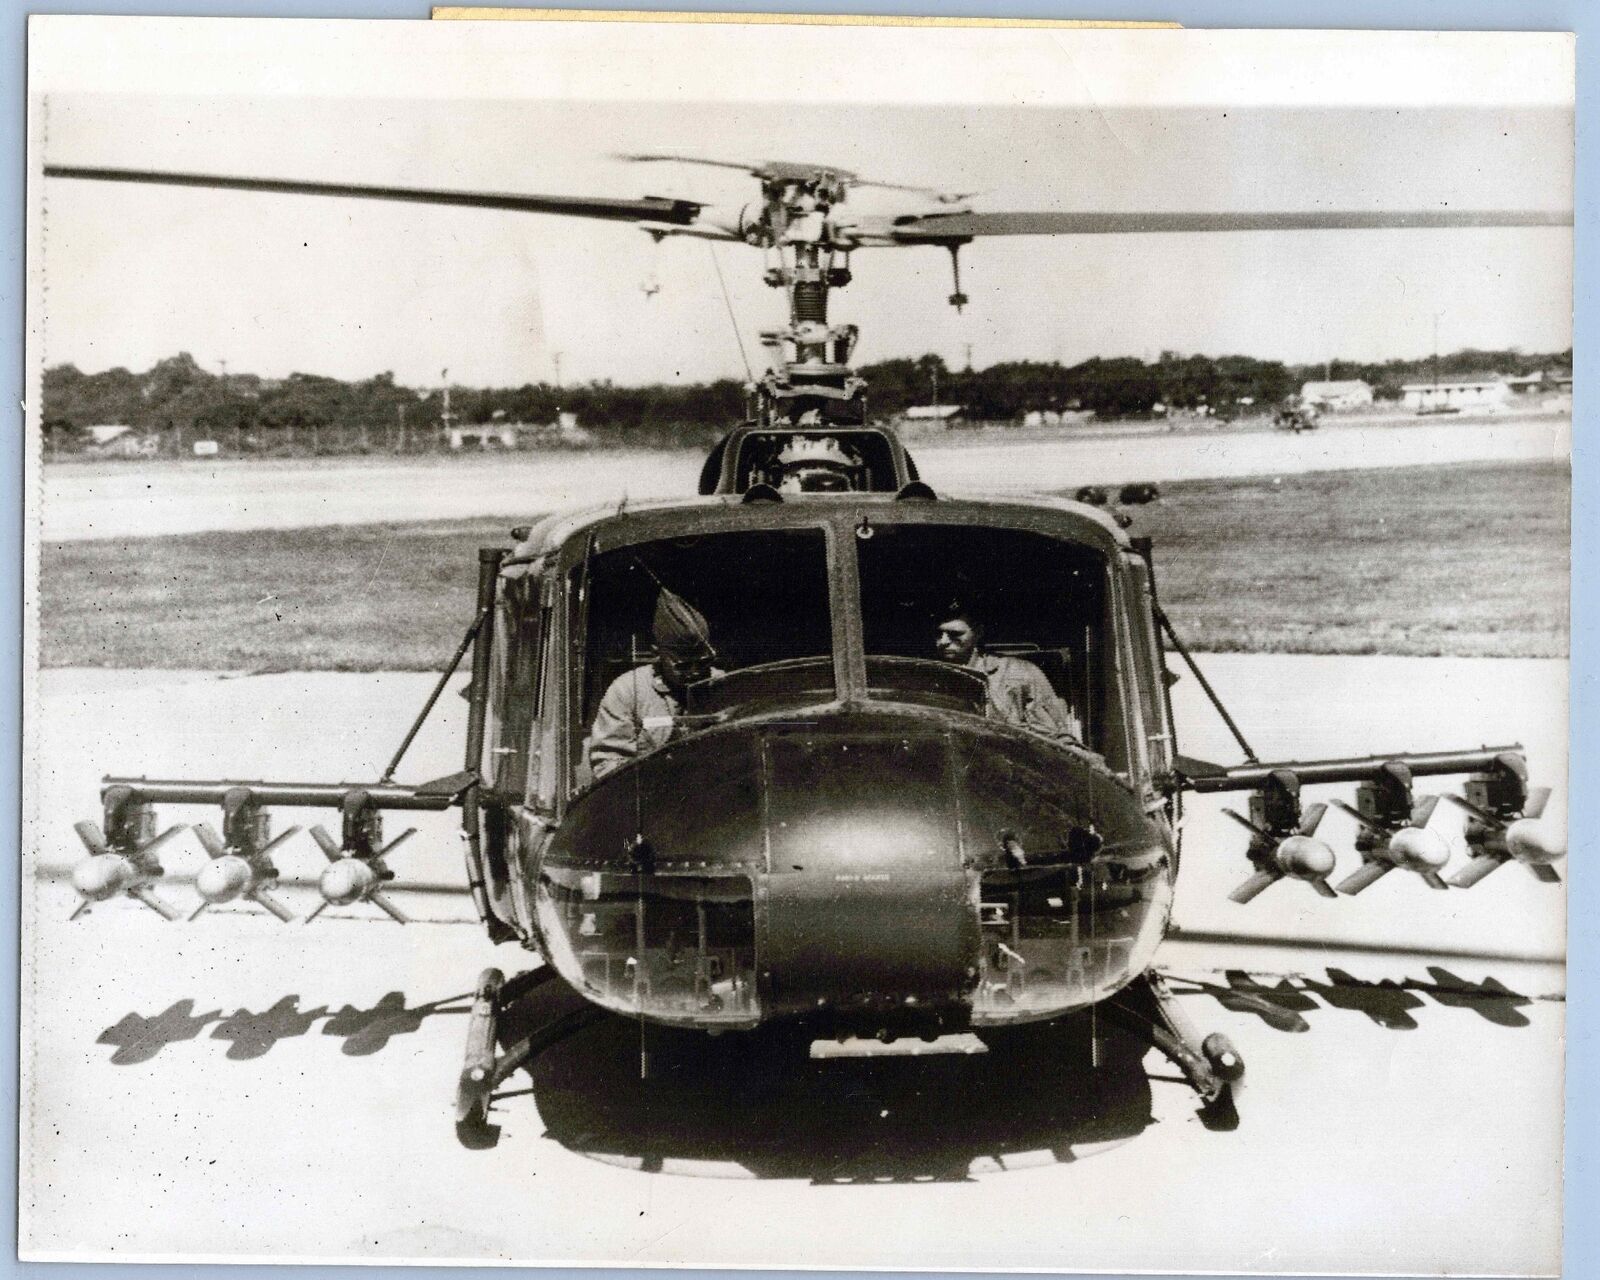 Bell Iroquois Helicopter With Nord Ss-11 Missiles Vintage Original Press Photo